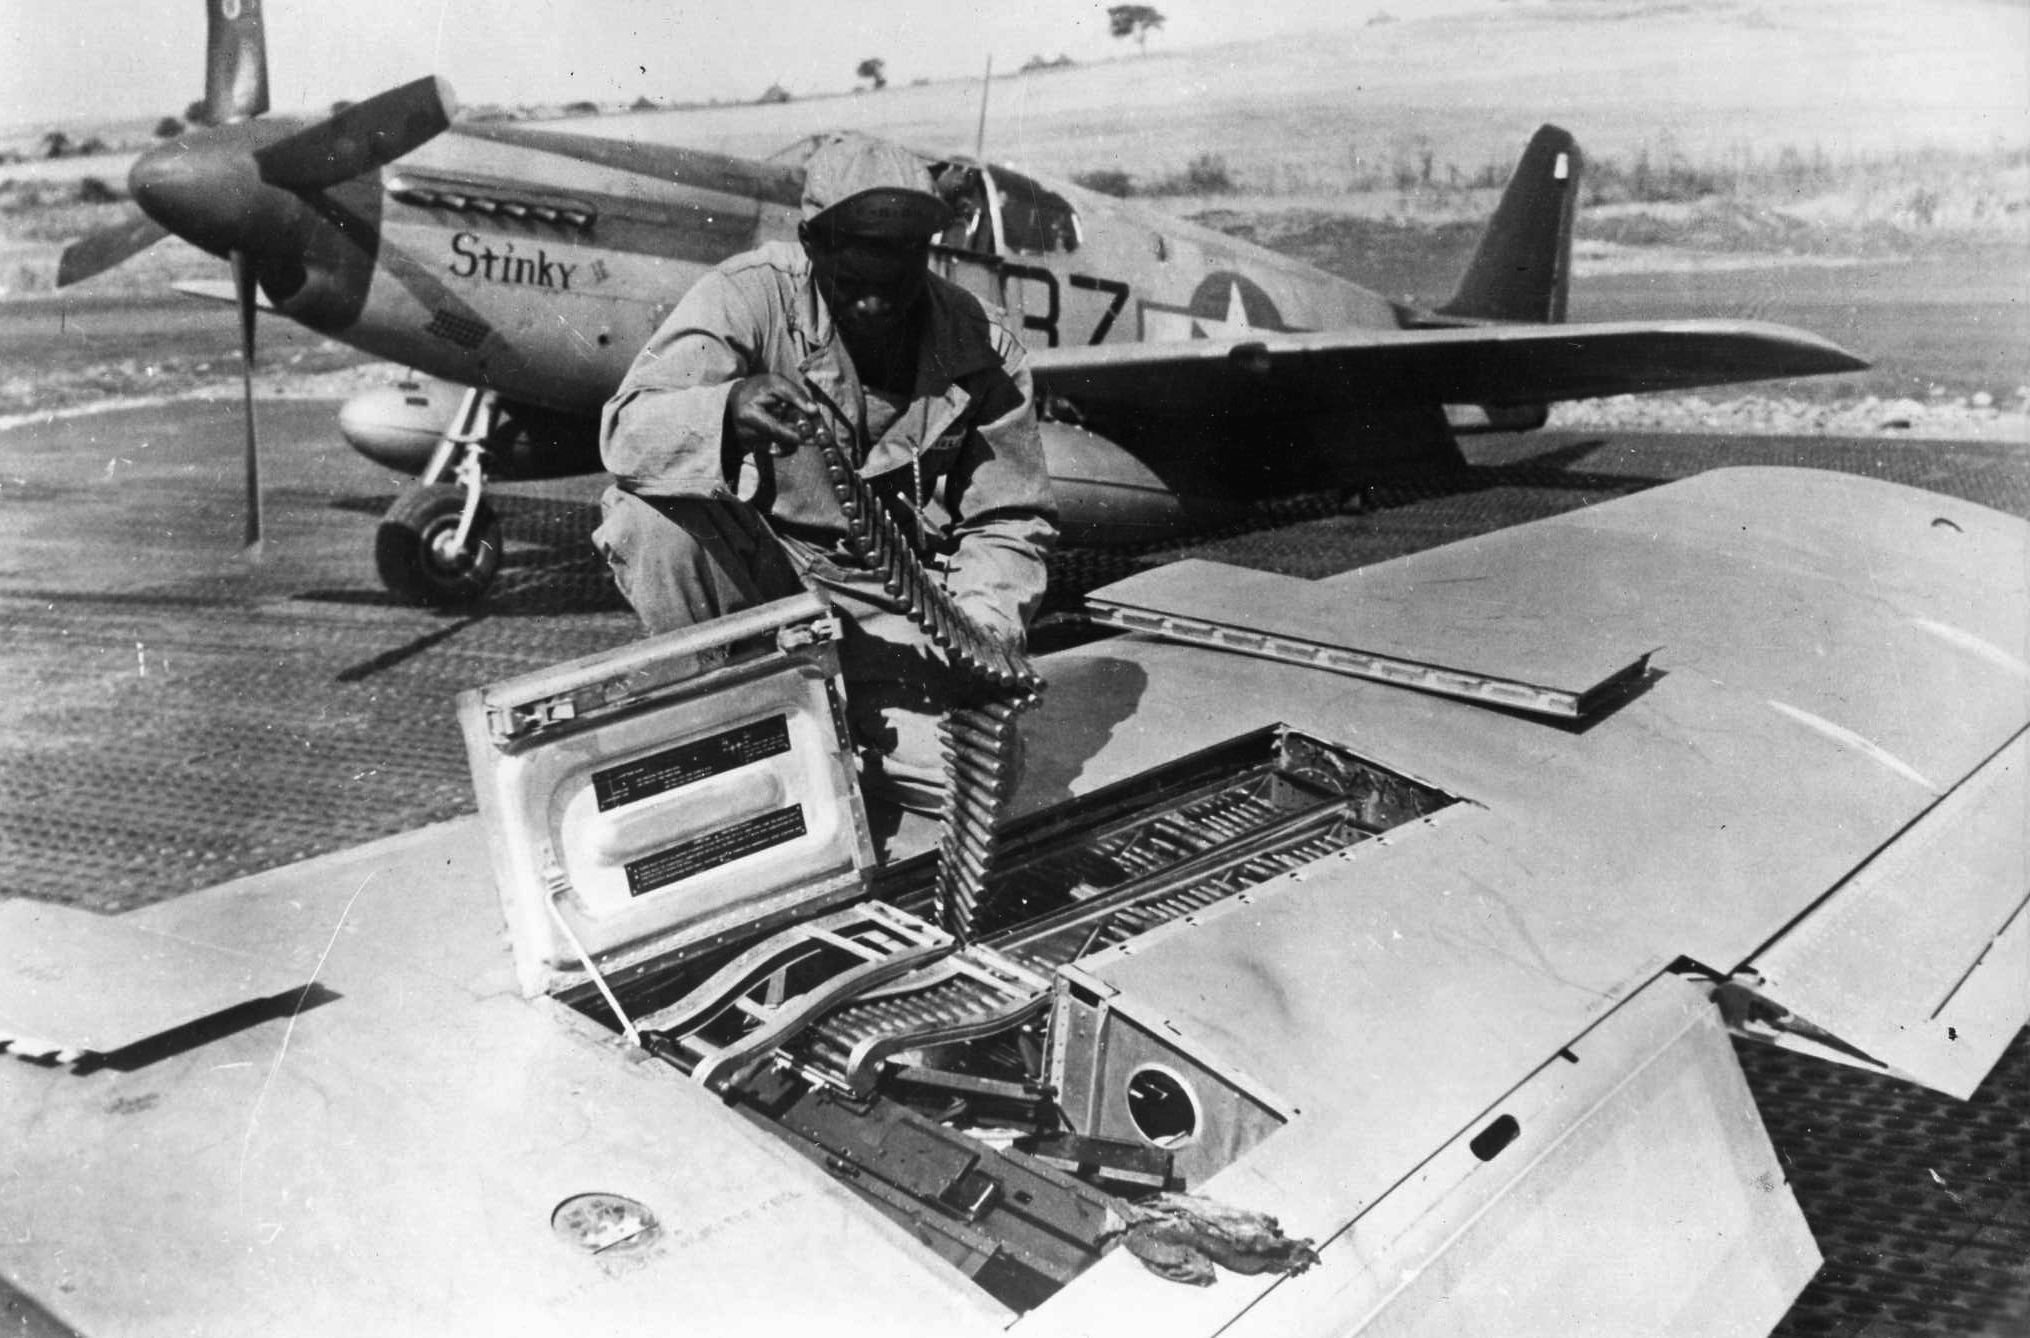 A Fifteenth Air Force armorer loads a belt of ammunition for one of a Mustang’s six .50-caliber machine guns. Flying from its base in Italy, this fighter plane was being readied for a mission over Germany.  Often, when escort duties were completed, the Mustangs were allowed to seek targets of opportunity.